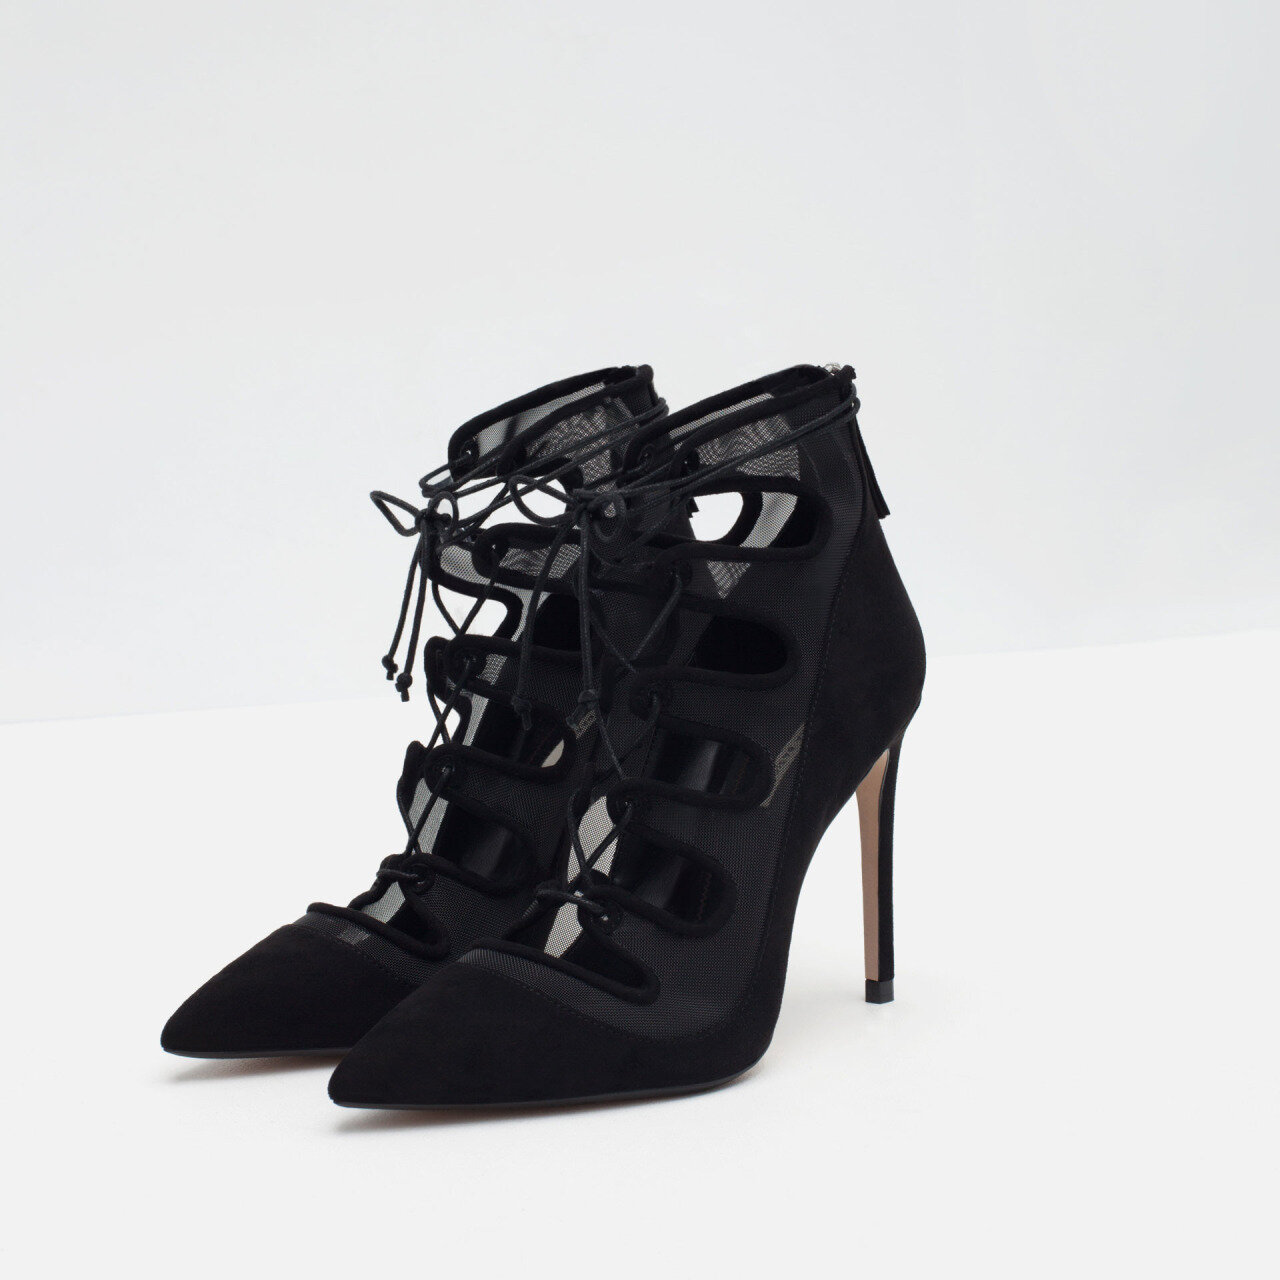 Zara Lace-Up Heeled Shoes with Mesh Detail.jpg